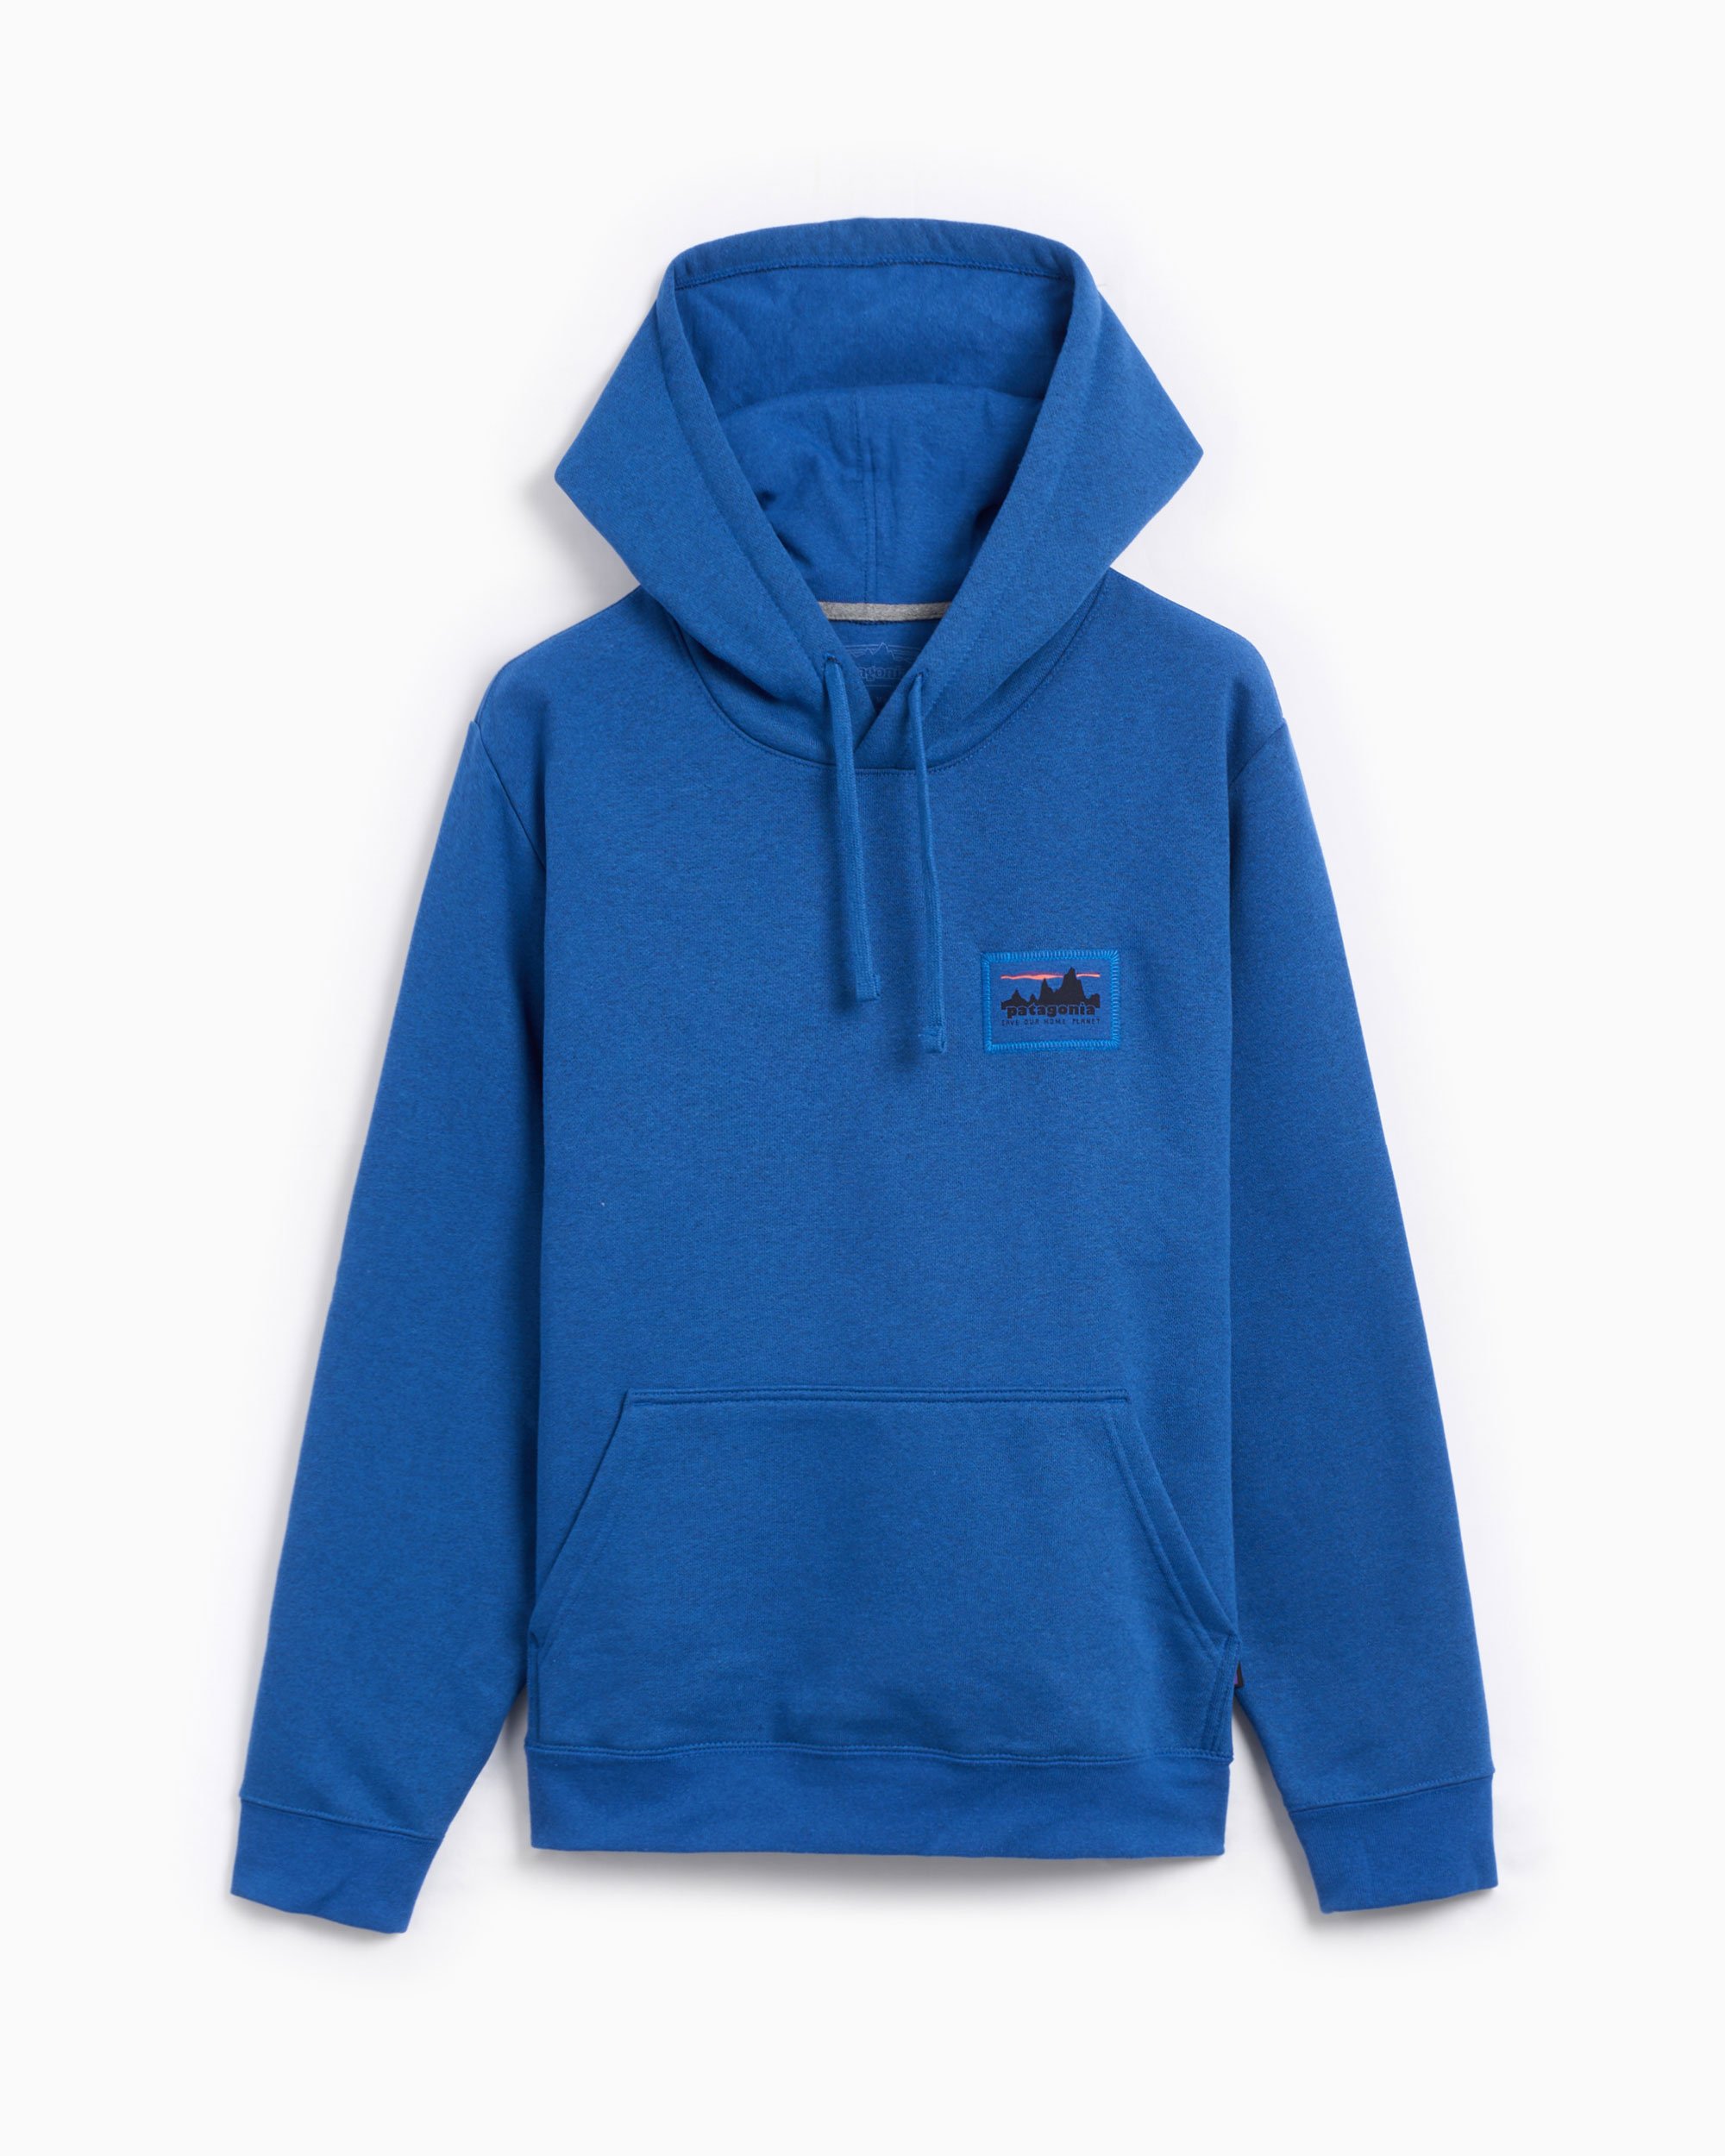 Patagonia P-6 Logo Uprisal Hoody BUGR, Sweaters, Shirts and Pullovers, Clothing